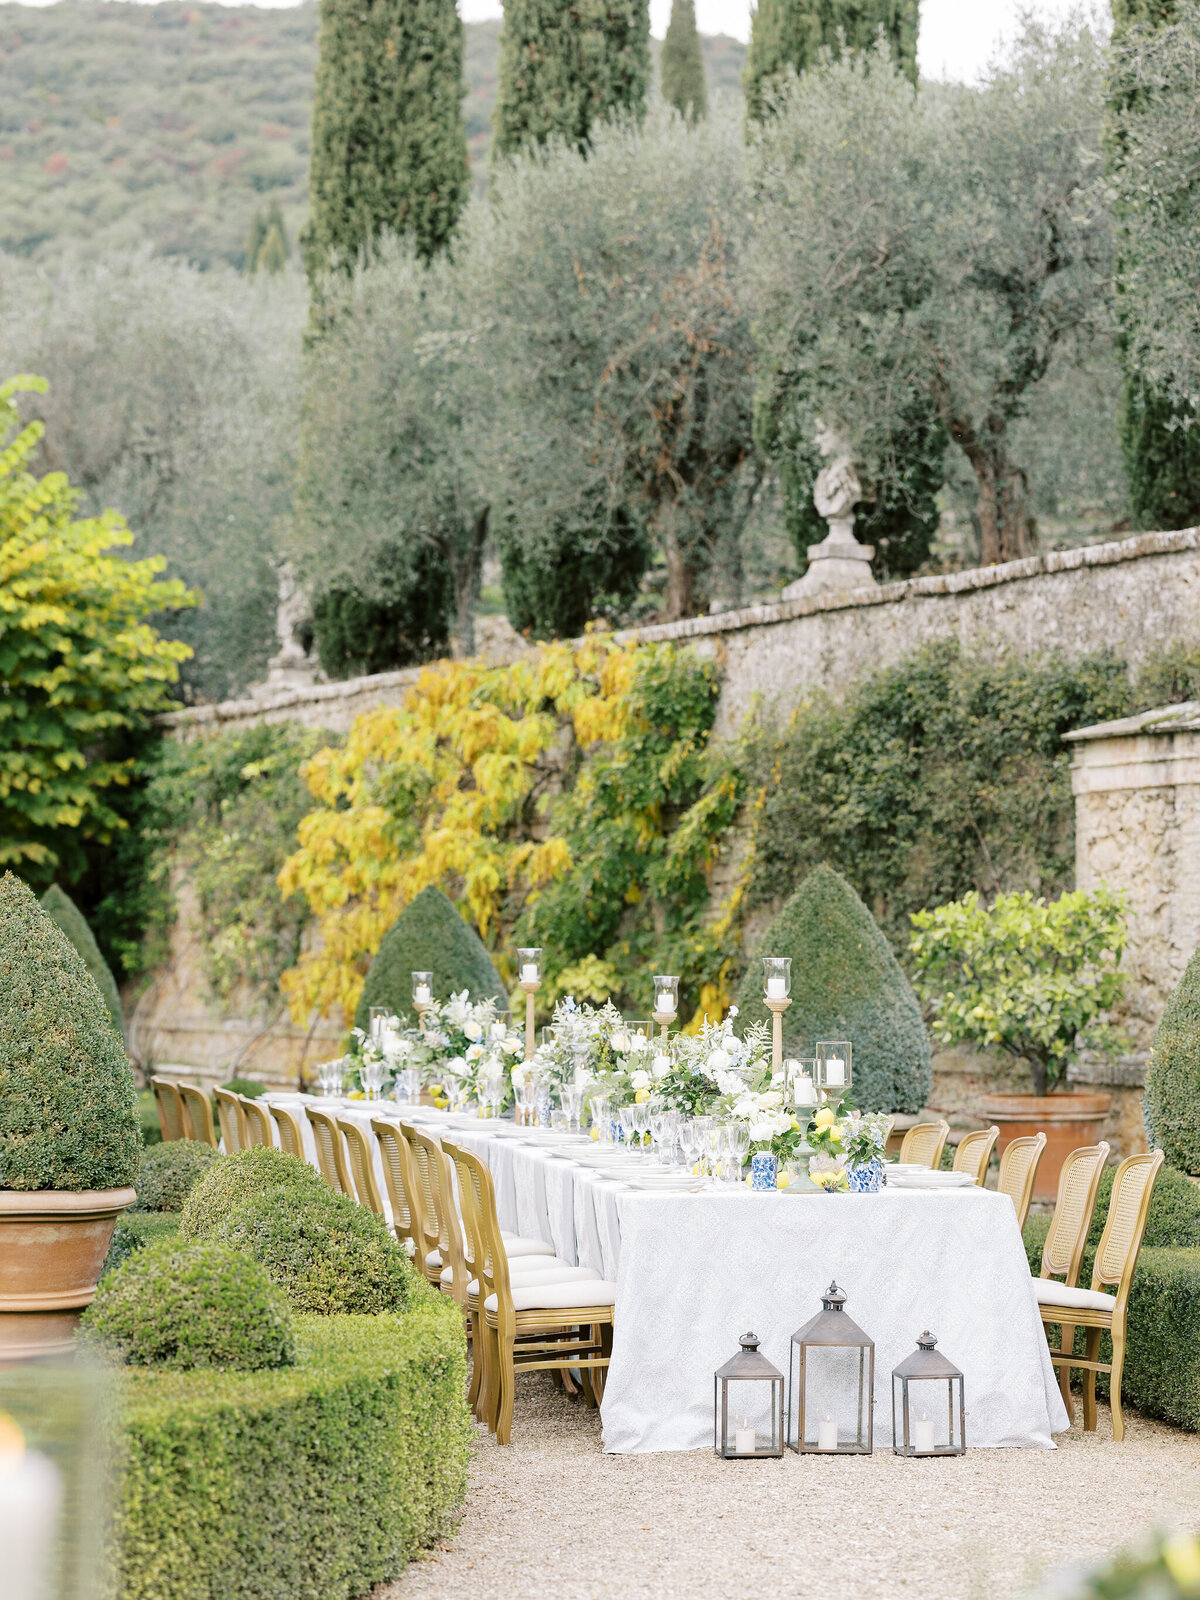 tablescape image with blue and lemon accents in garden of Villa Cetinale in Italy